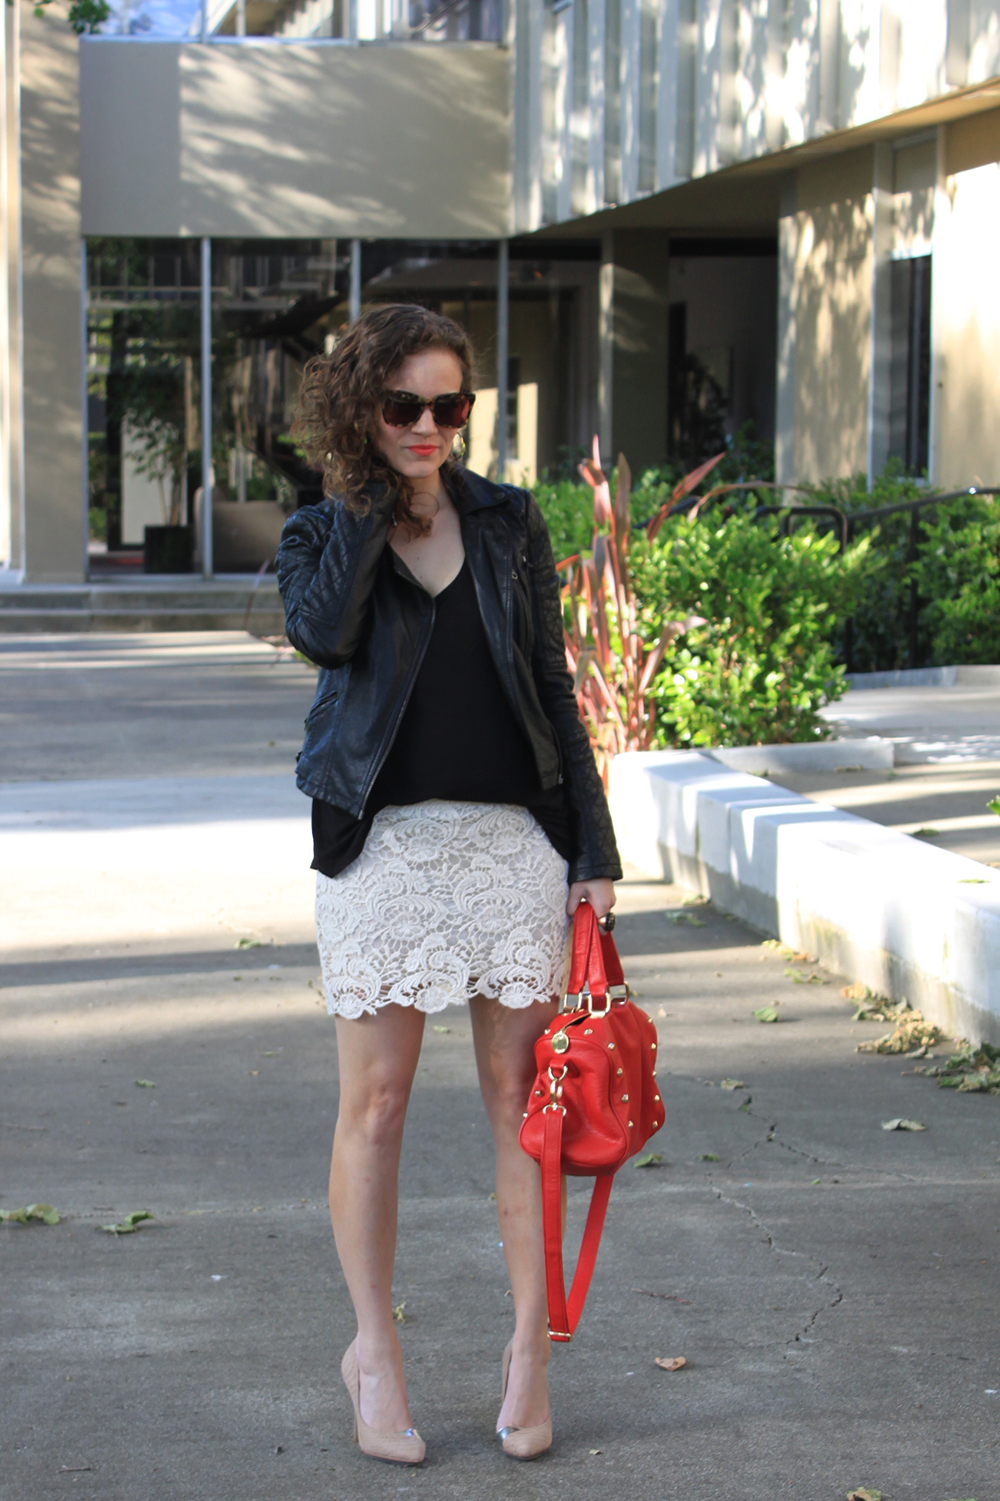 lace skirt and topshop leather jacket - sf style blogger - kate franco